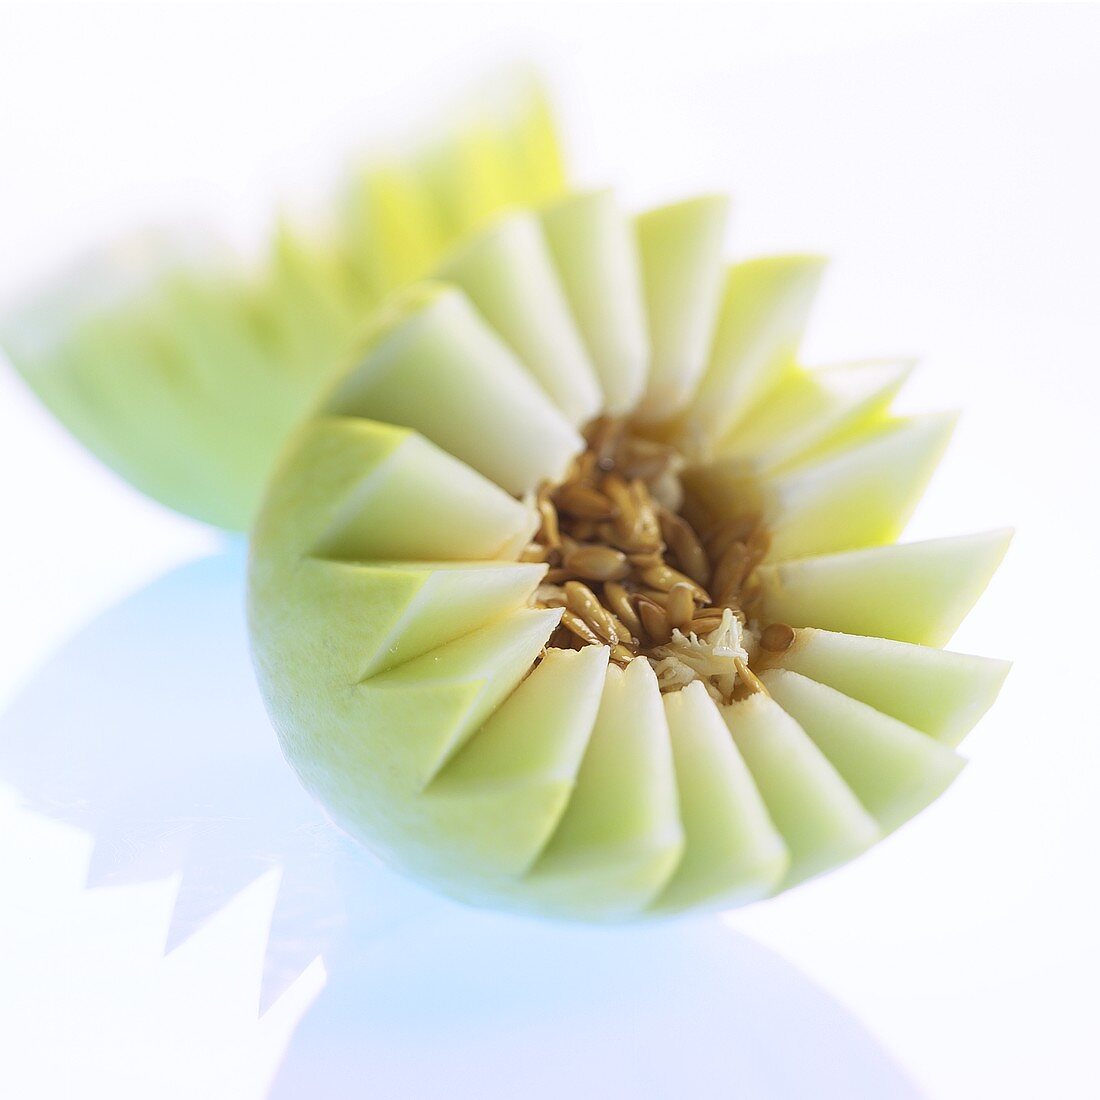 Carved honeydew melon with seeds